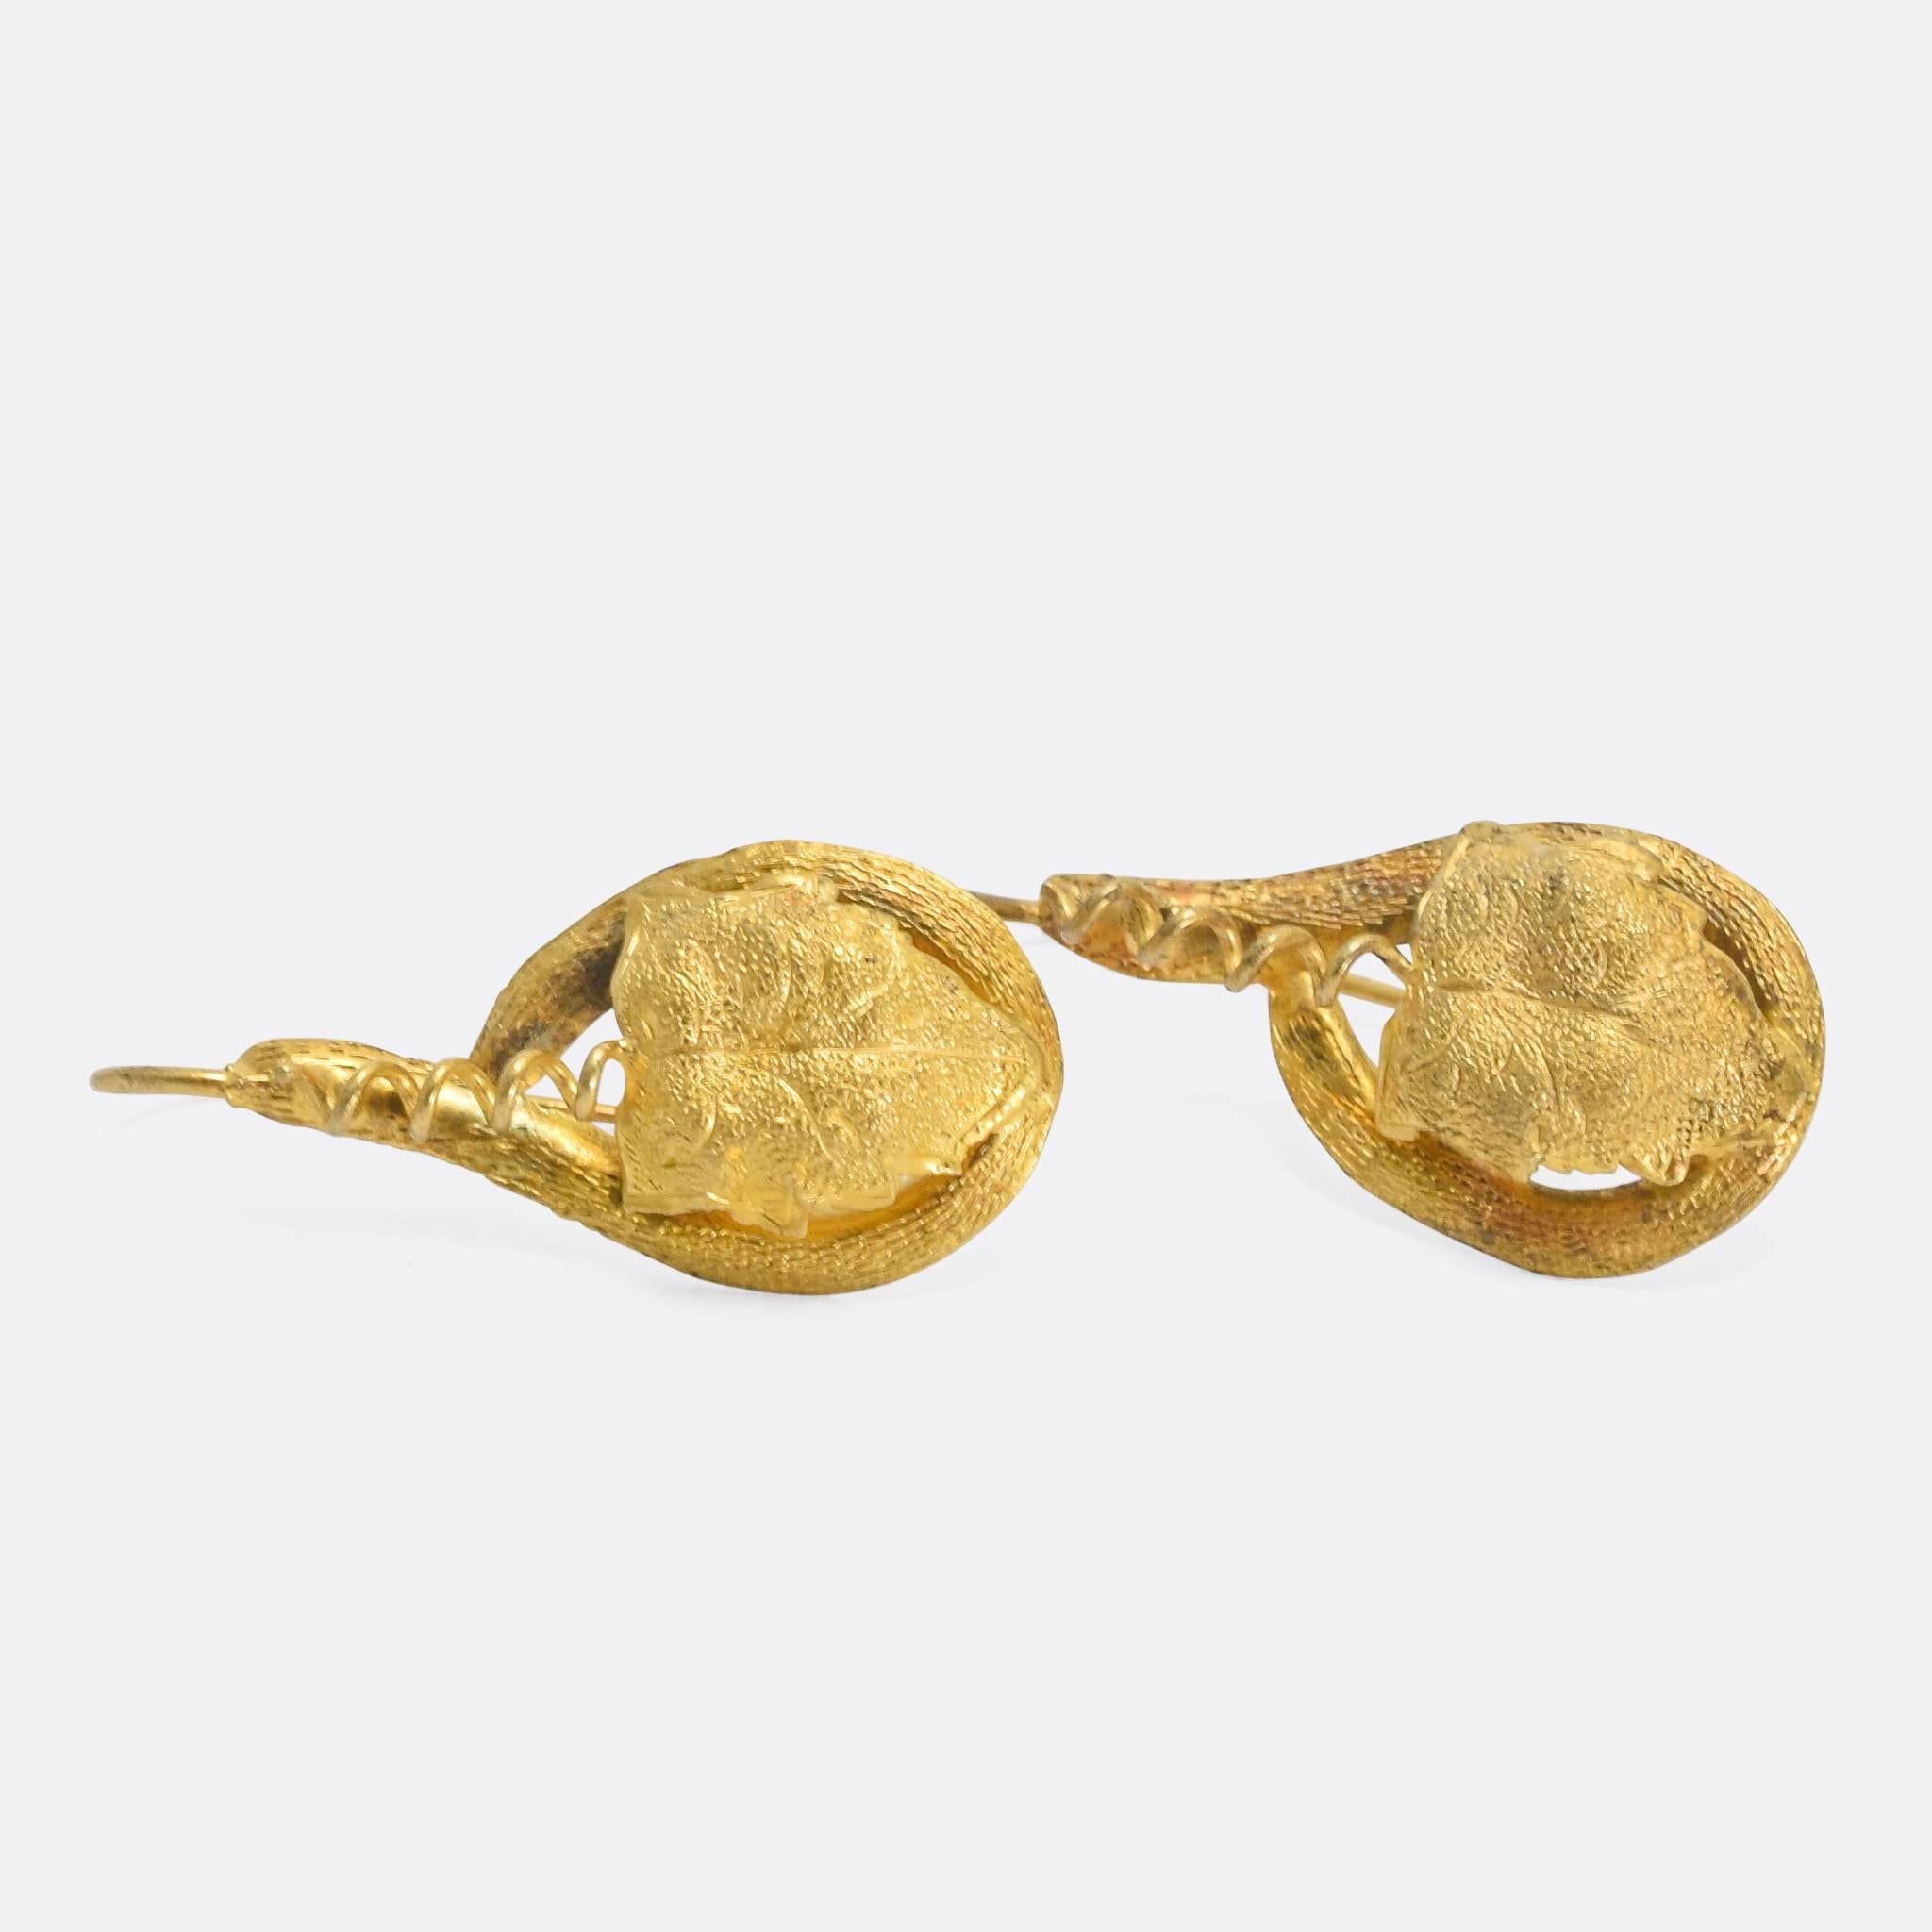 A pretty pair of Victorian gold earrings, with grape leaf and vine motif. The gold is wonderfully textured, and each vine is spiralled.

MEASUREMENTS
Drop: 2.5cm

WEIGHT
1.1g

MARKS
No marks present, tests as 15k gold